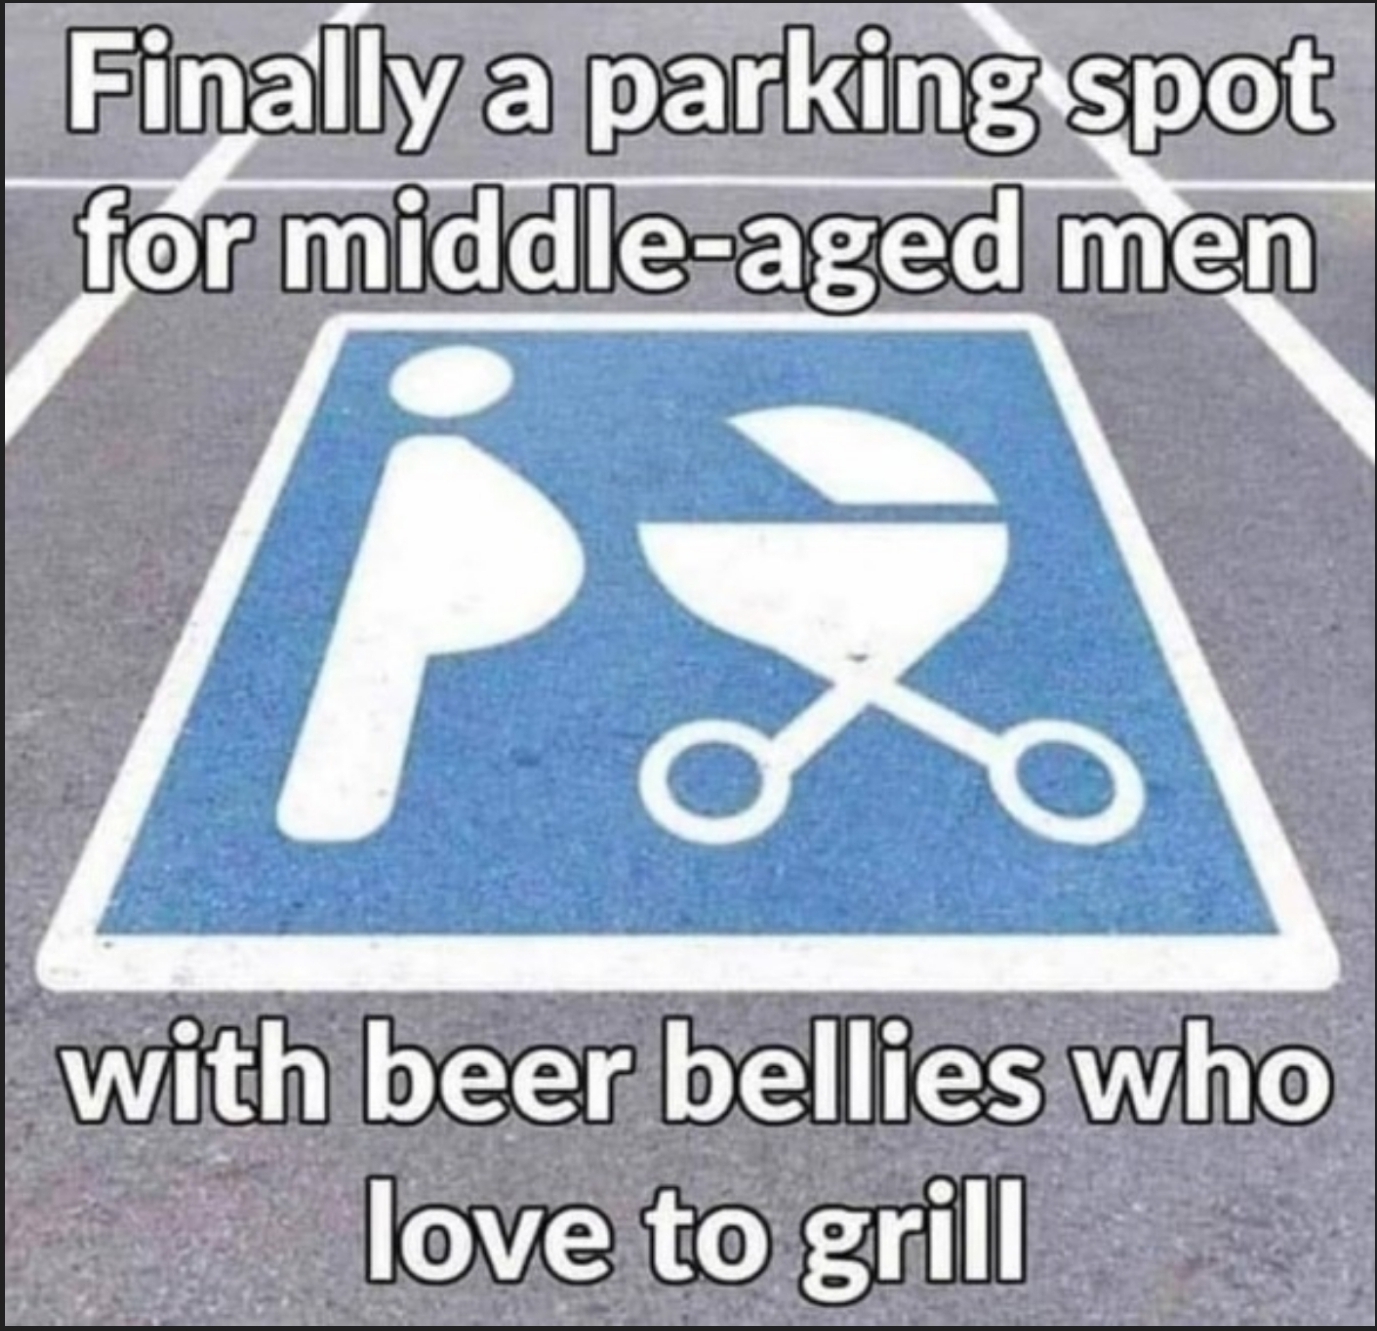 signage - Finally a parking spot for middleaged men with beer bellies who love to grill